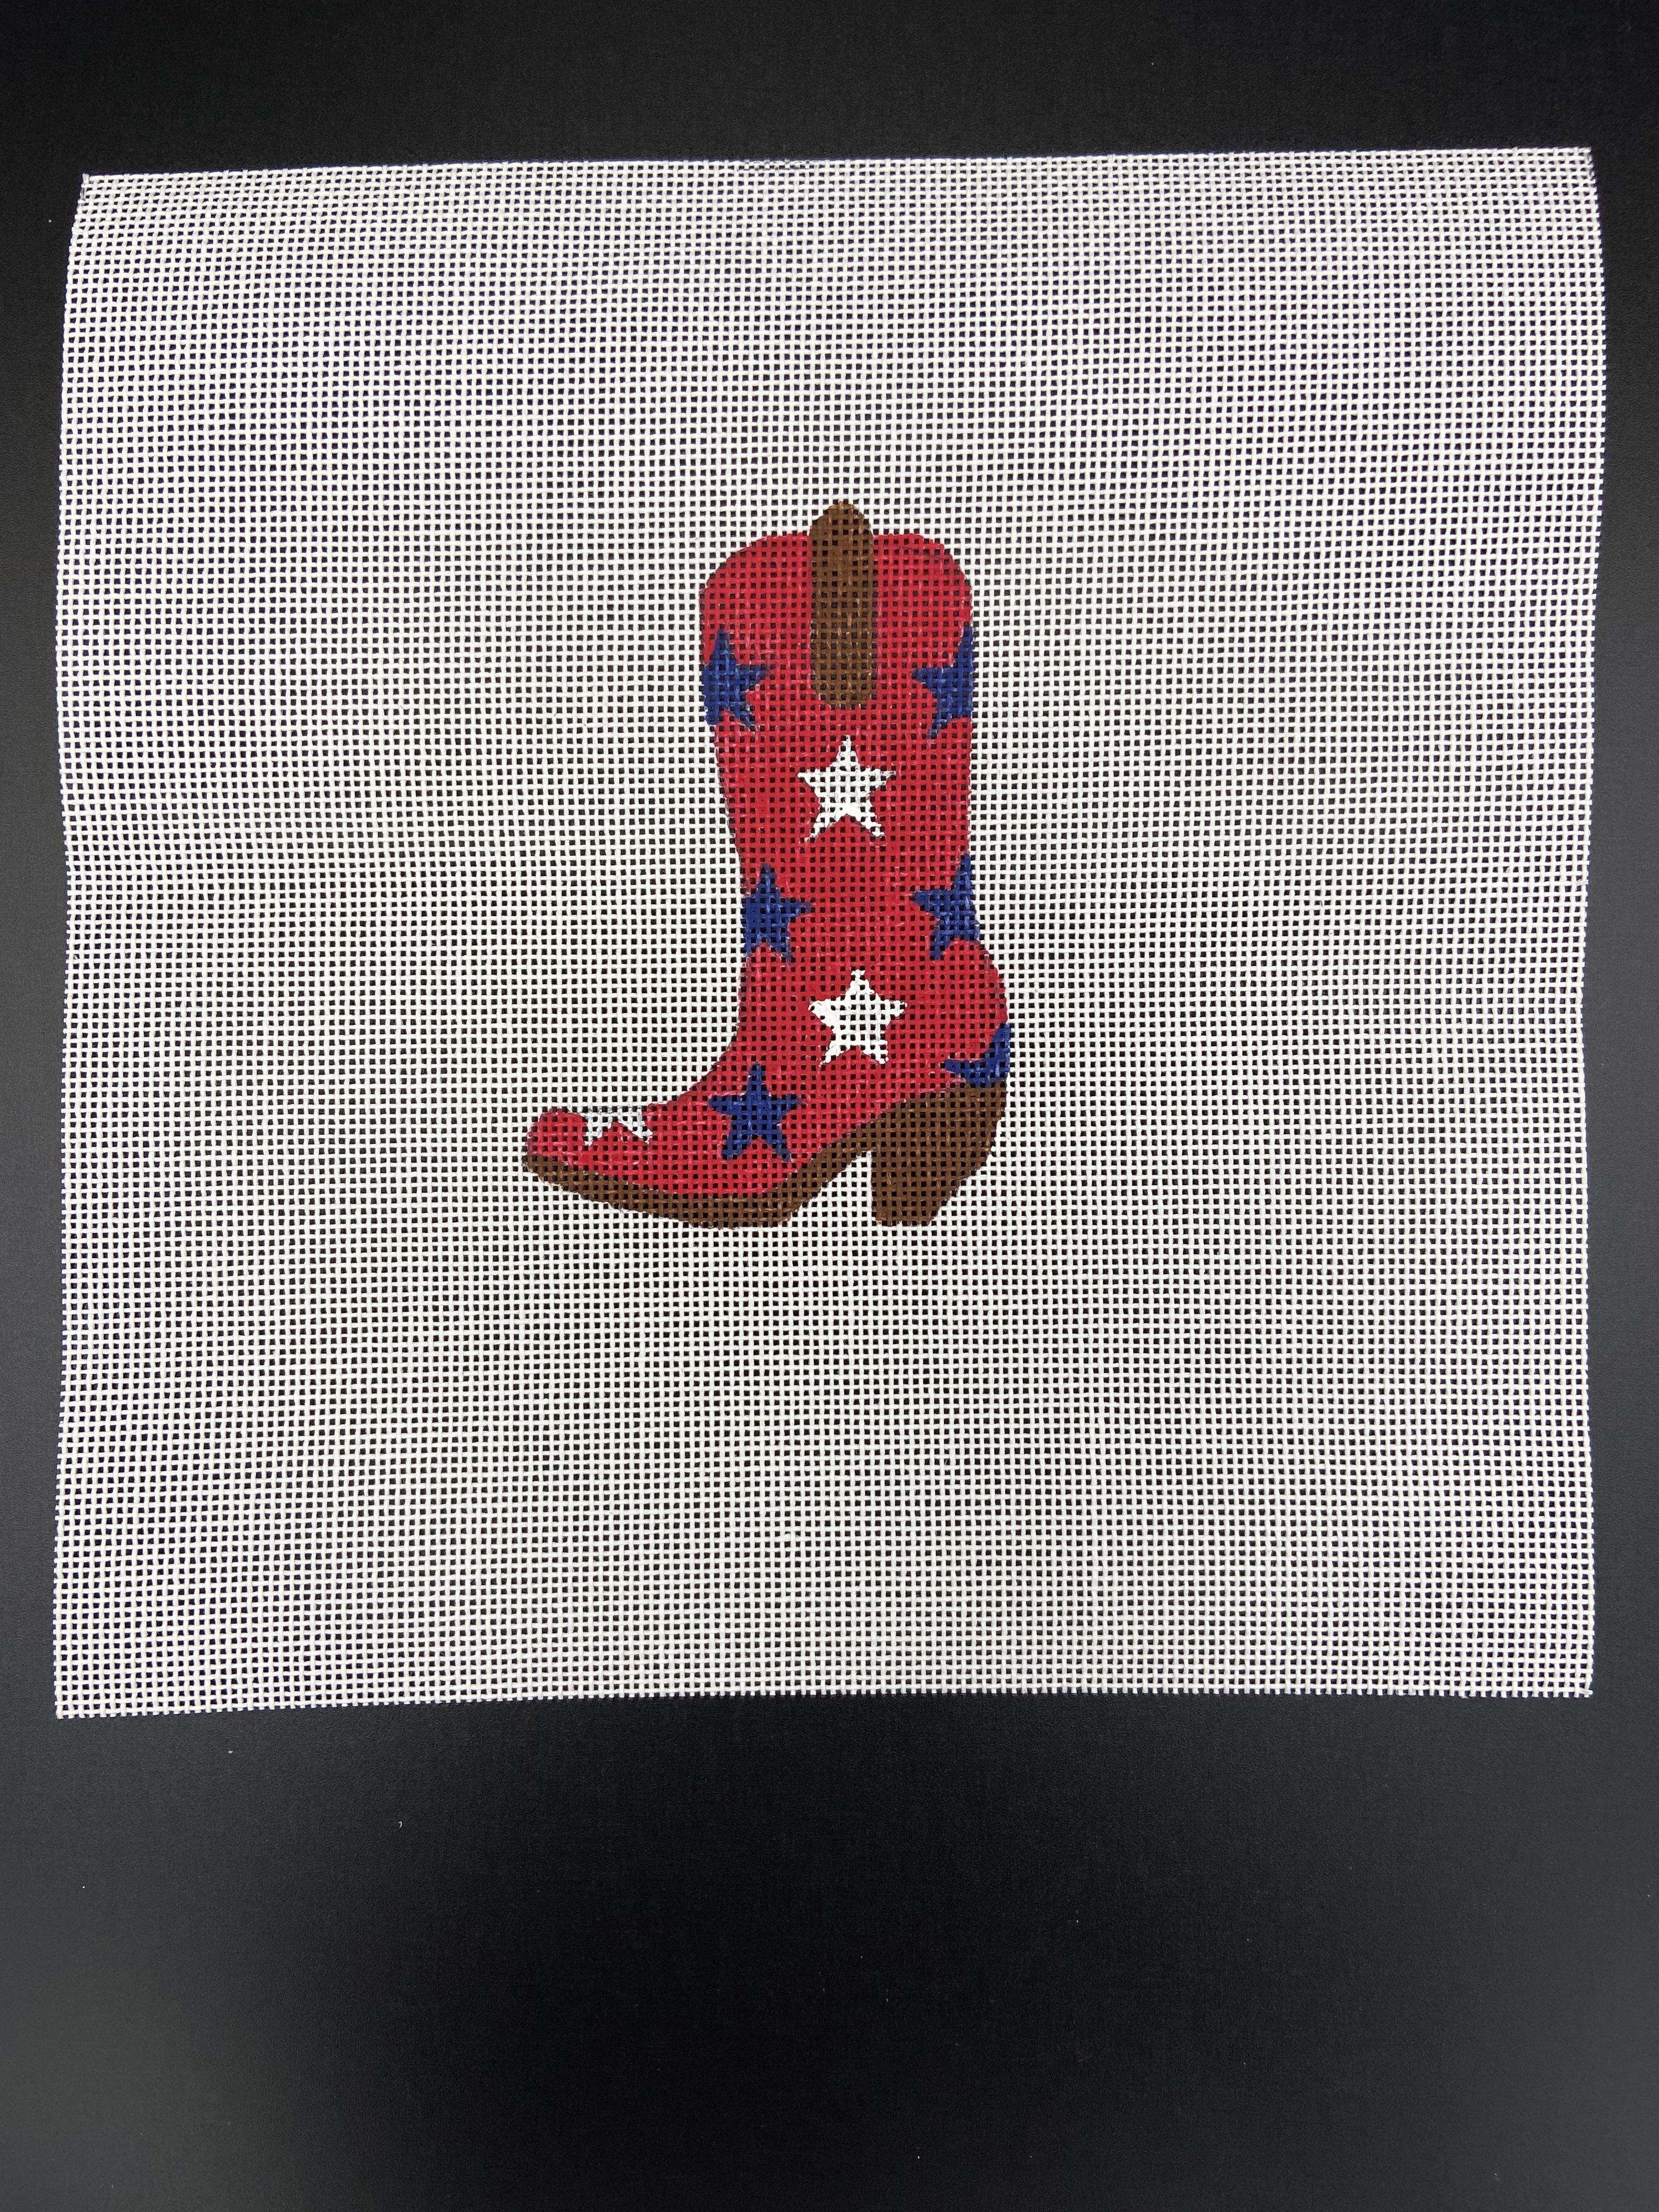 Three Cheers for the Red, White & Blue Boot